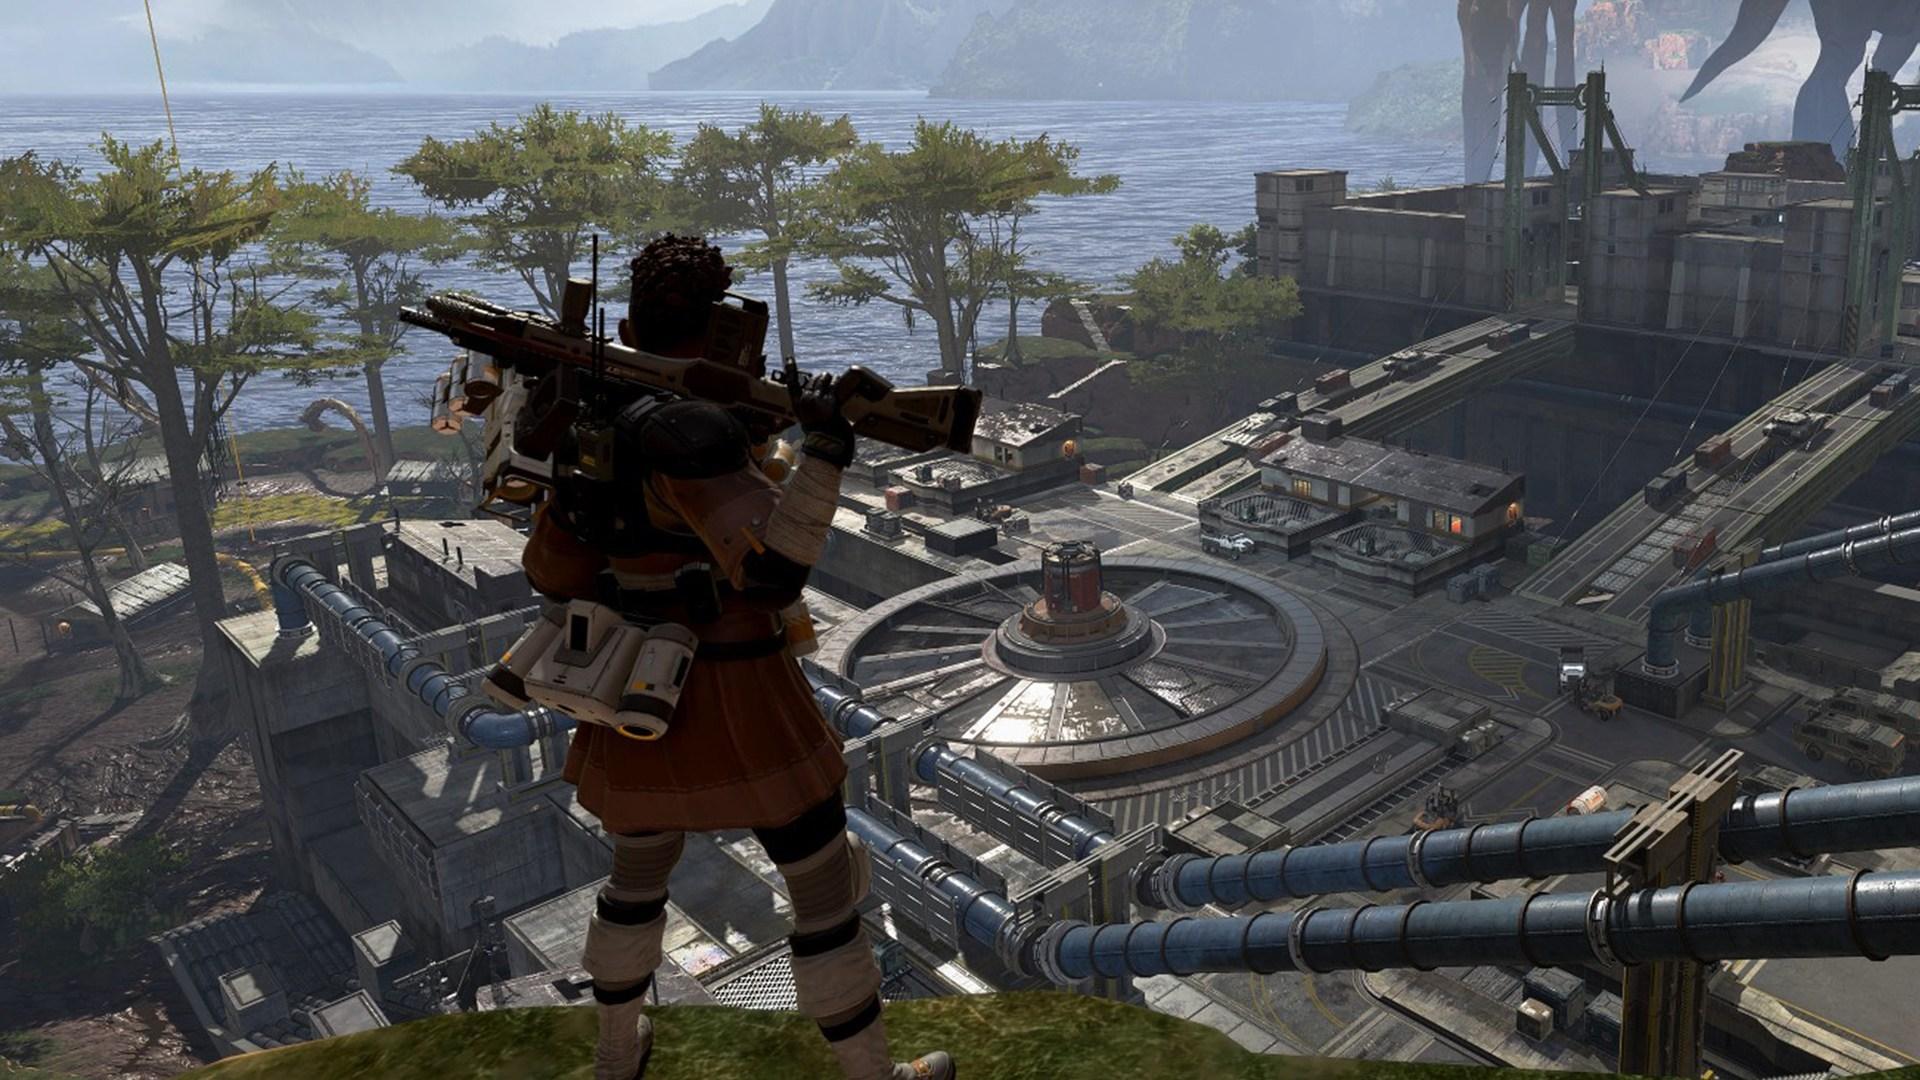 Titanfall battle royale Apex Legends is free and out right now